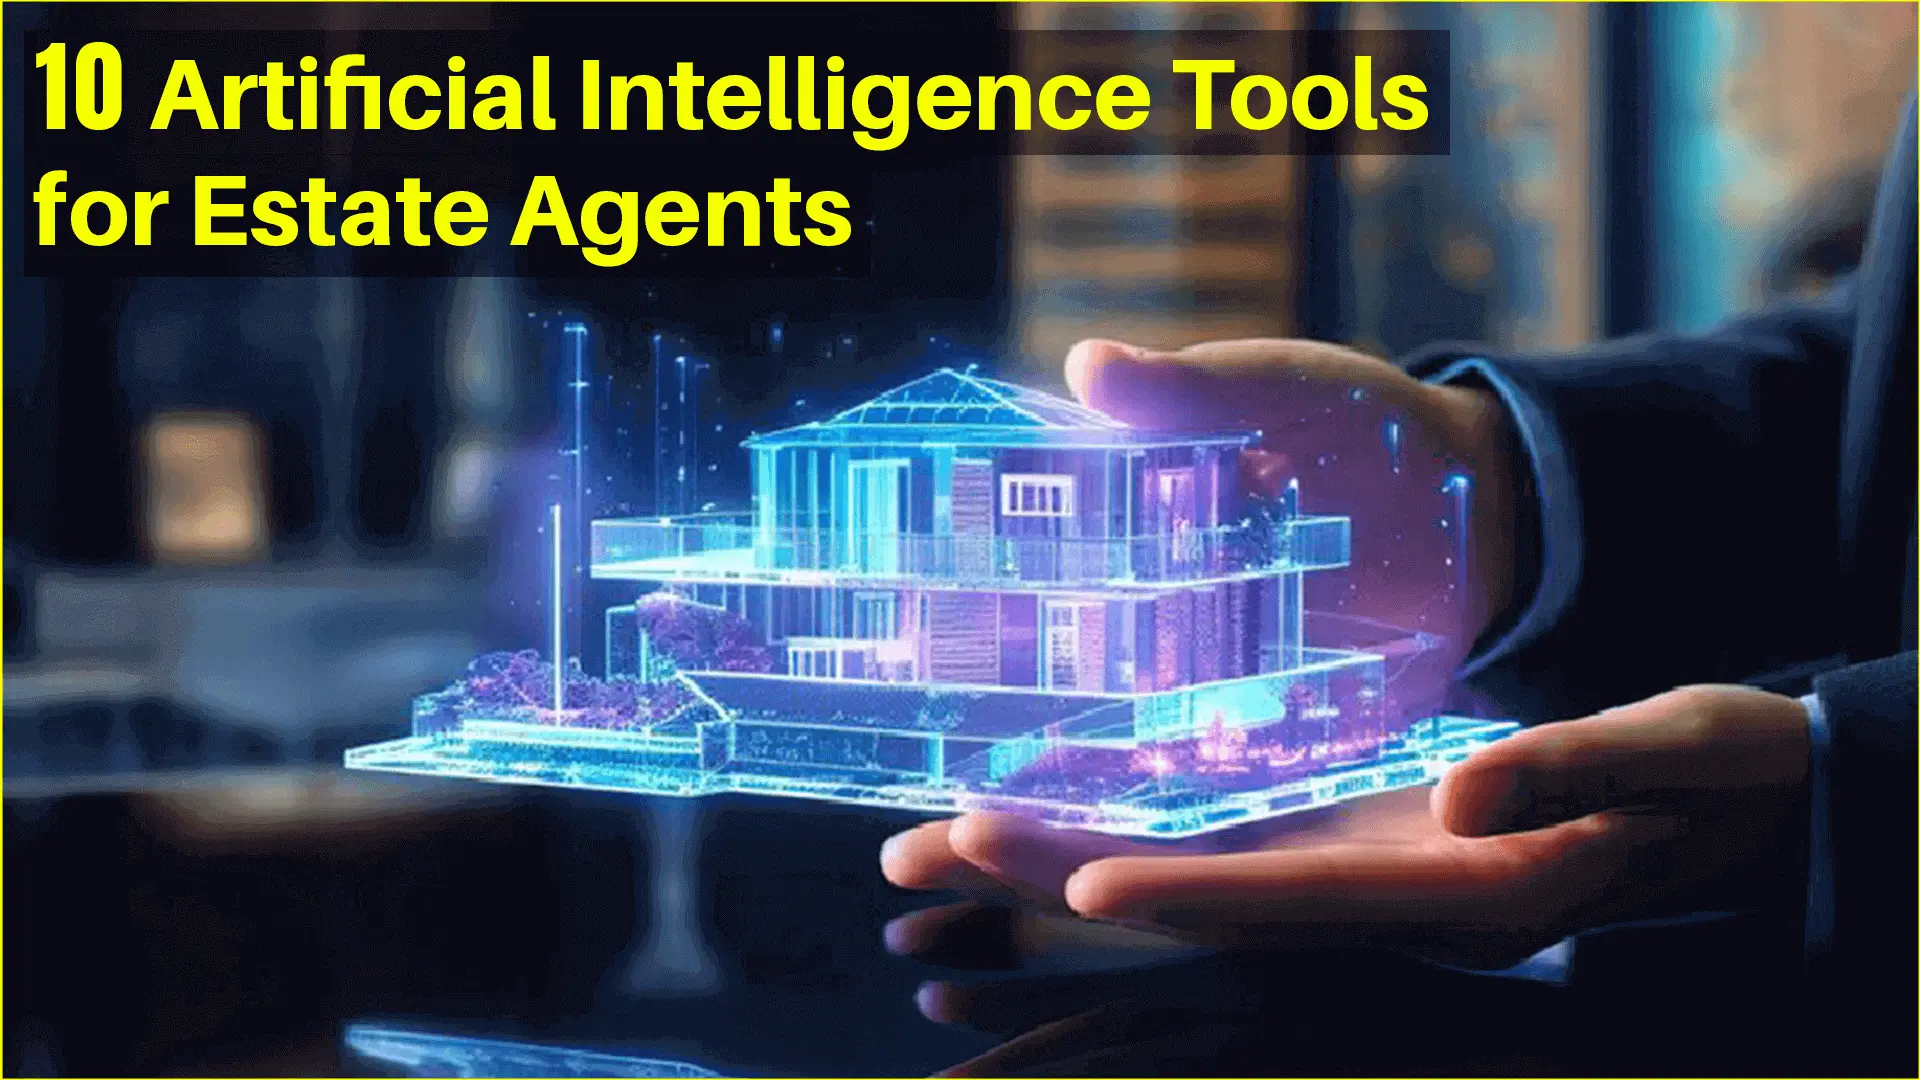 Holographic projection of a smart home highlights innovative AI technology in the real estate sector for estate agents.